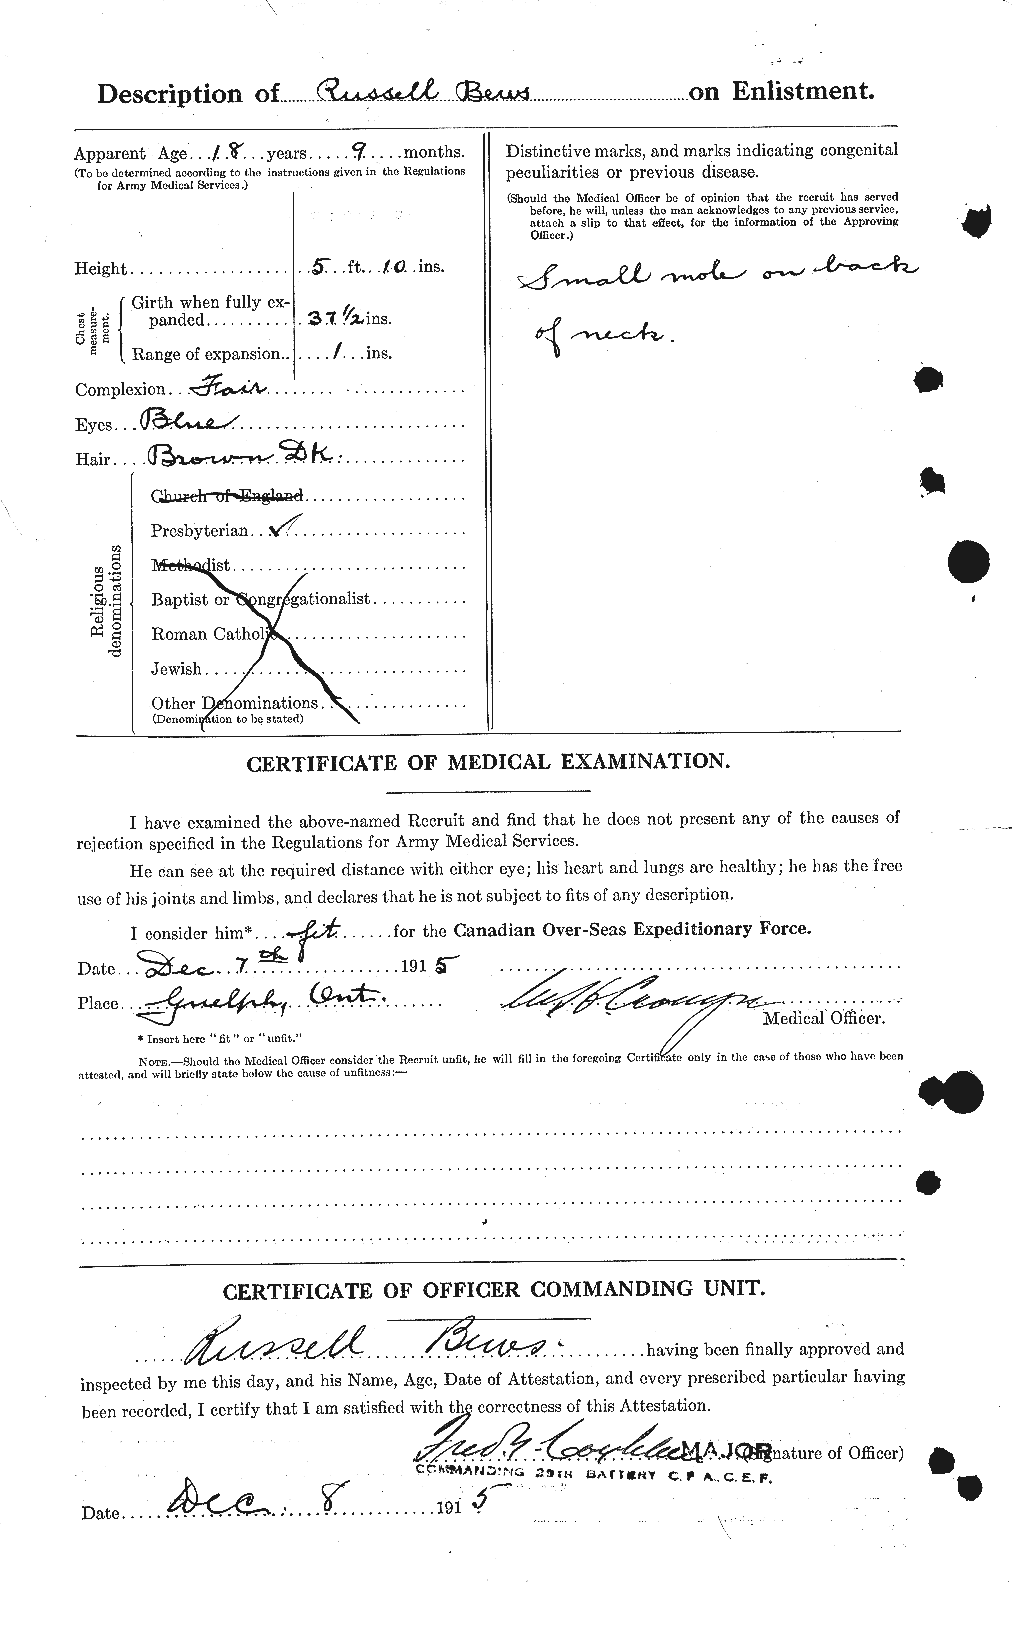 Personnel Records of the First World War - CEF 237473b